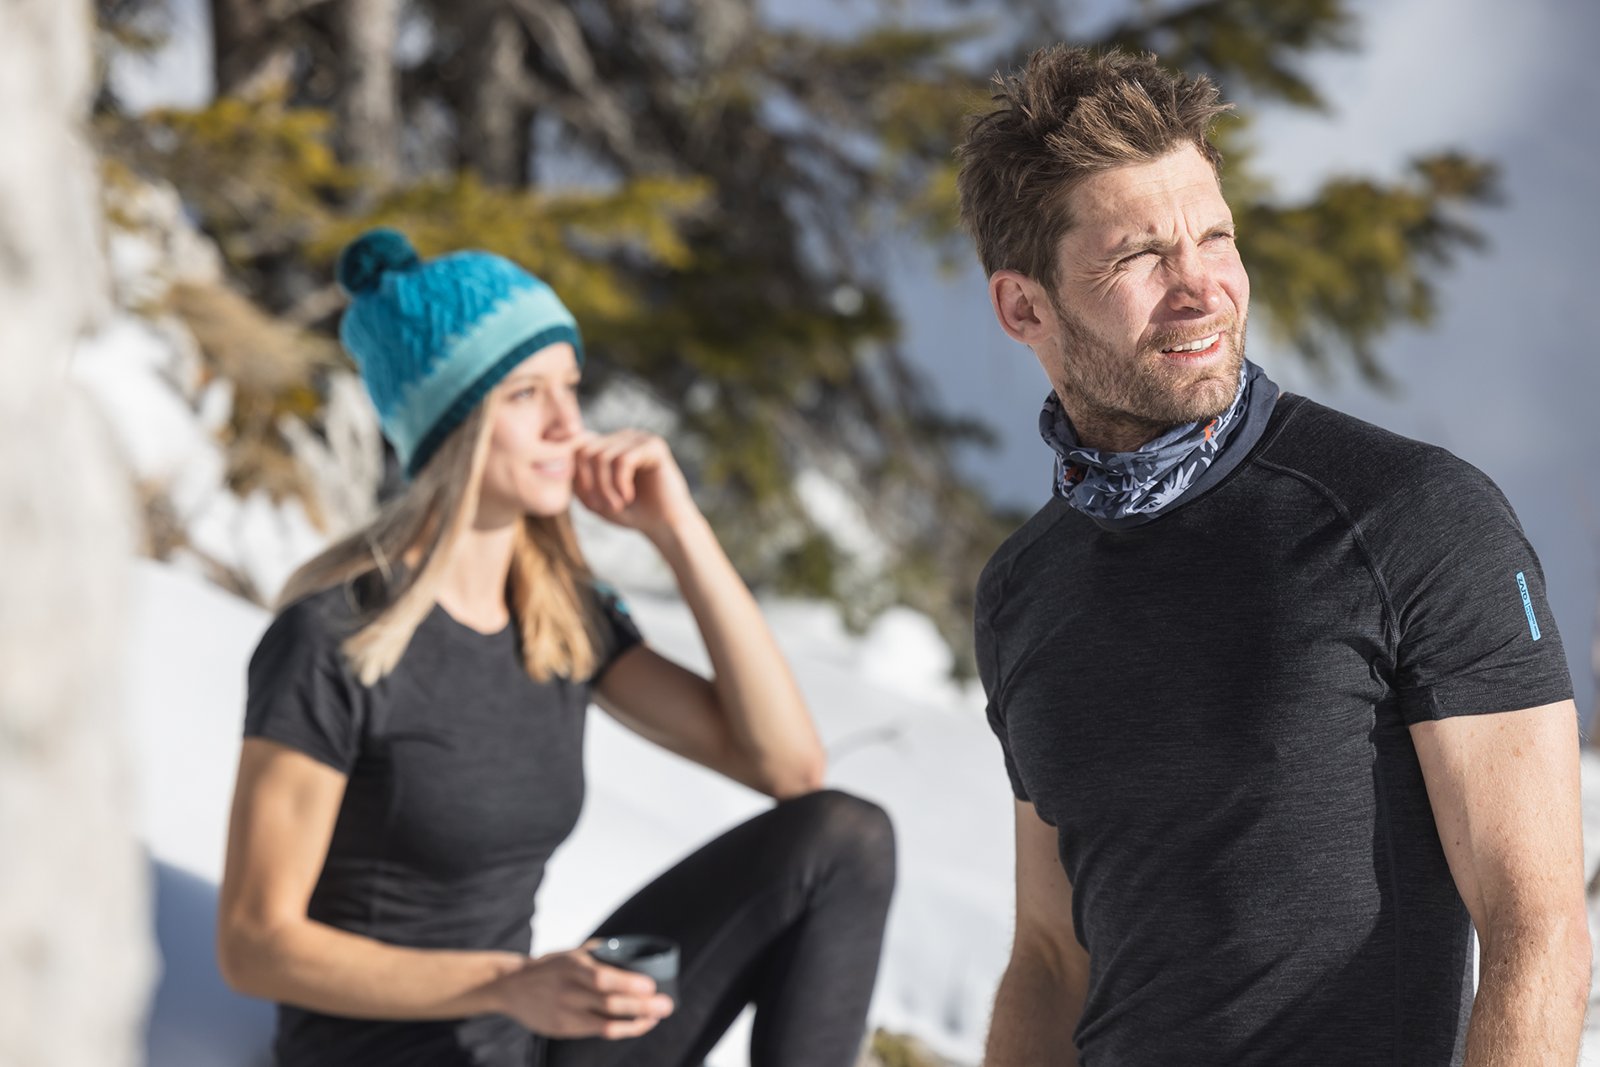 Outdoor clothing for all seasons: These 5 outdoor staples will take you through the year!